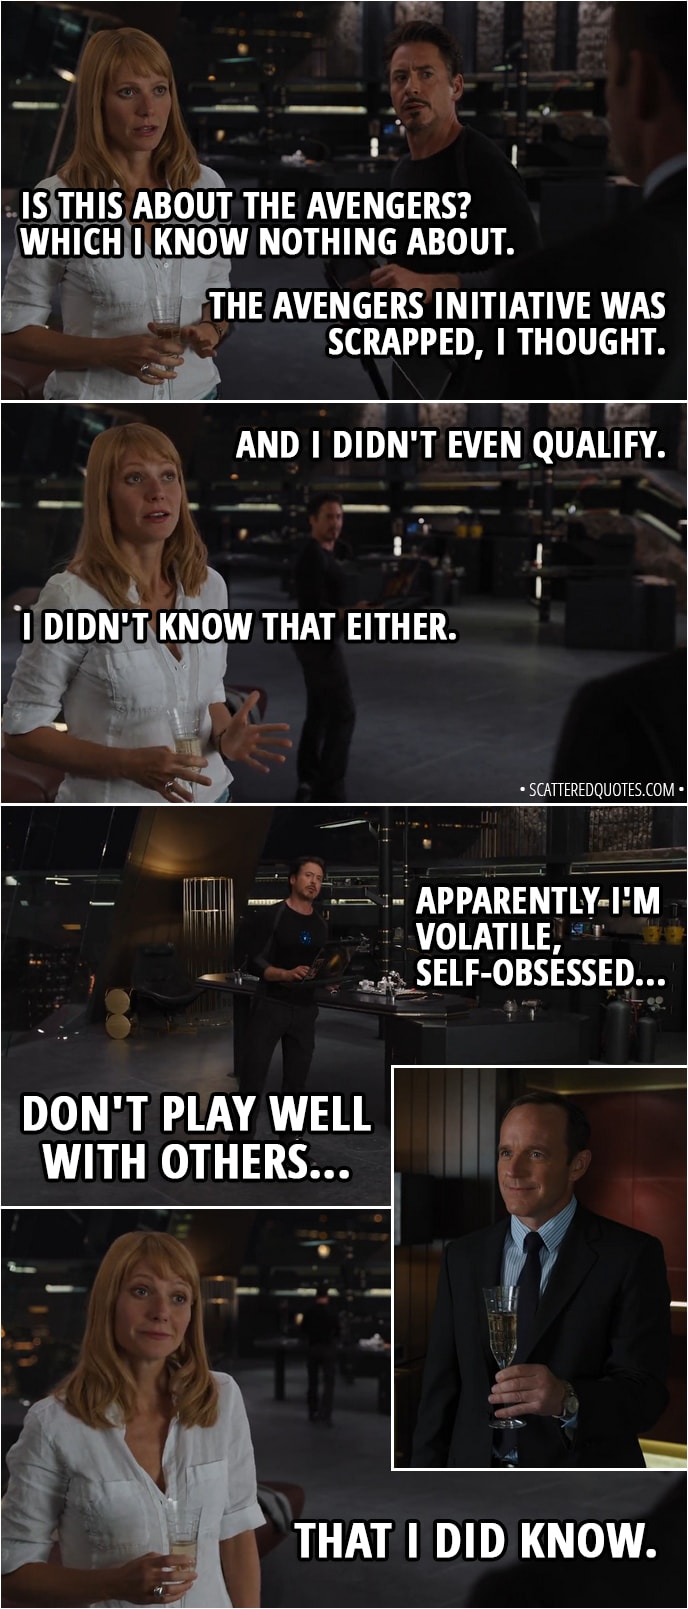 Quote from The Avengers (2012) - Pepper Potts: Is this about the Avengers? Which I know nothing about. Tony Stark: The Avengers Initiative was scrapped, I thought. And I didn't even qualify. Pepper Potts: I didn't know that either. Tony Stark: Apparently I'm volatile, self-obsessed, don't play well with others. Pepper Potts: That I did know.